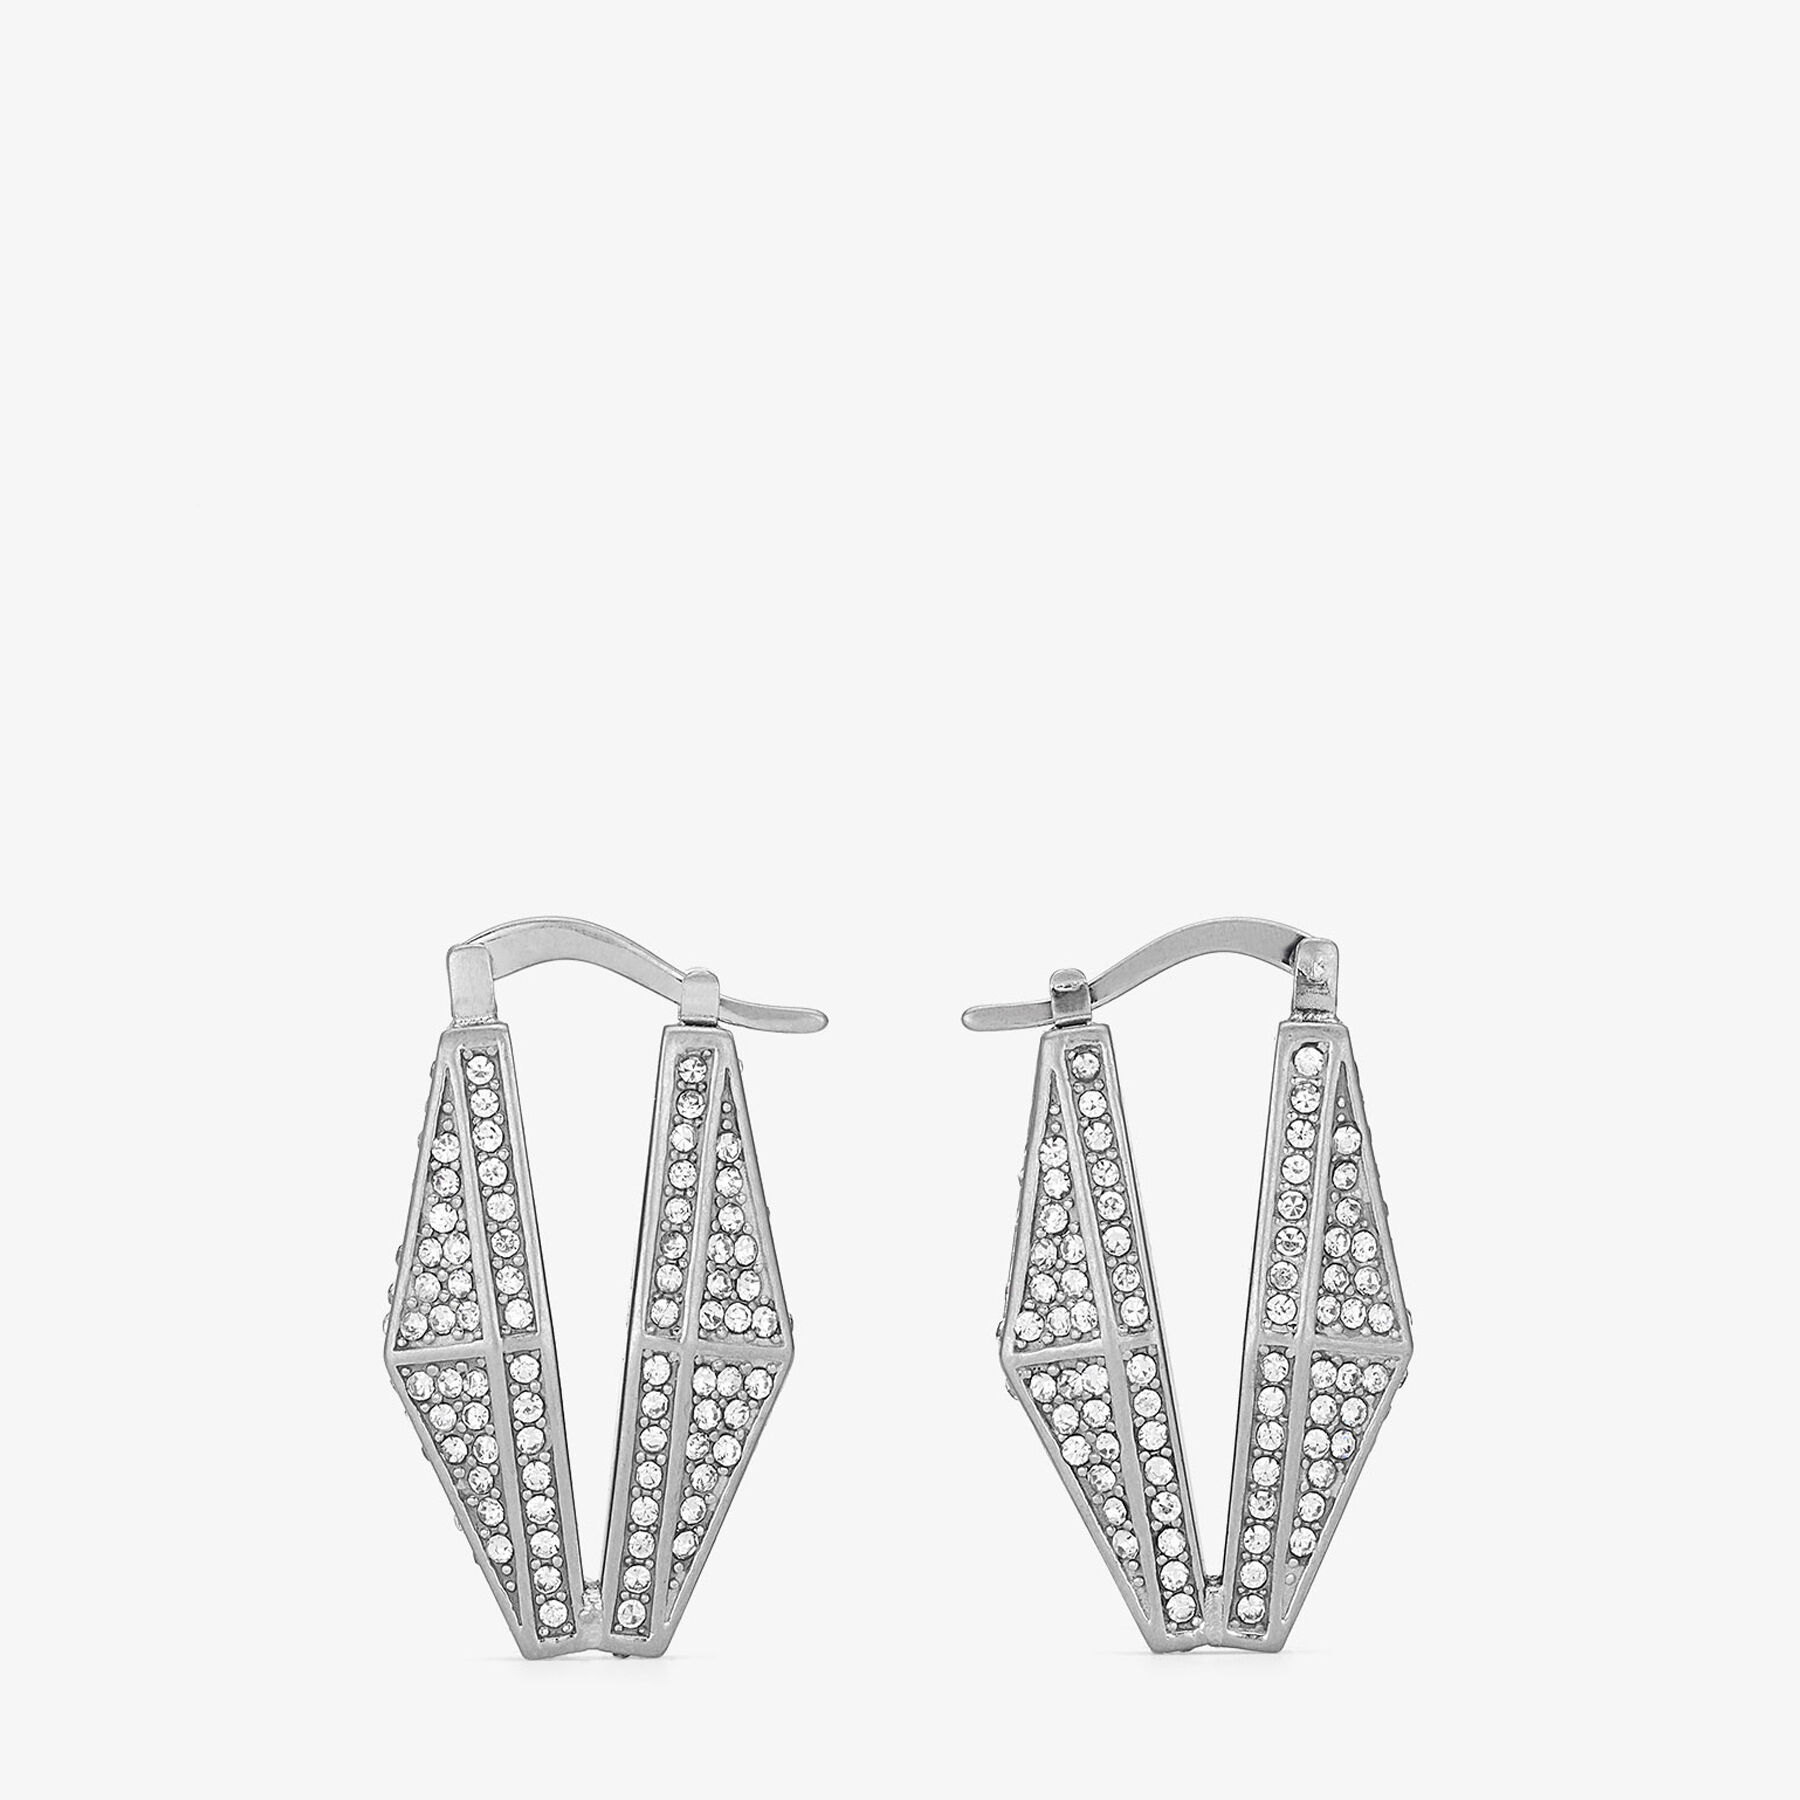 DIAMOND CHAIN EARRING | Silver-Finish Chain Earrings with Pave 